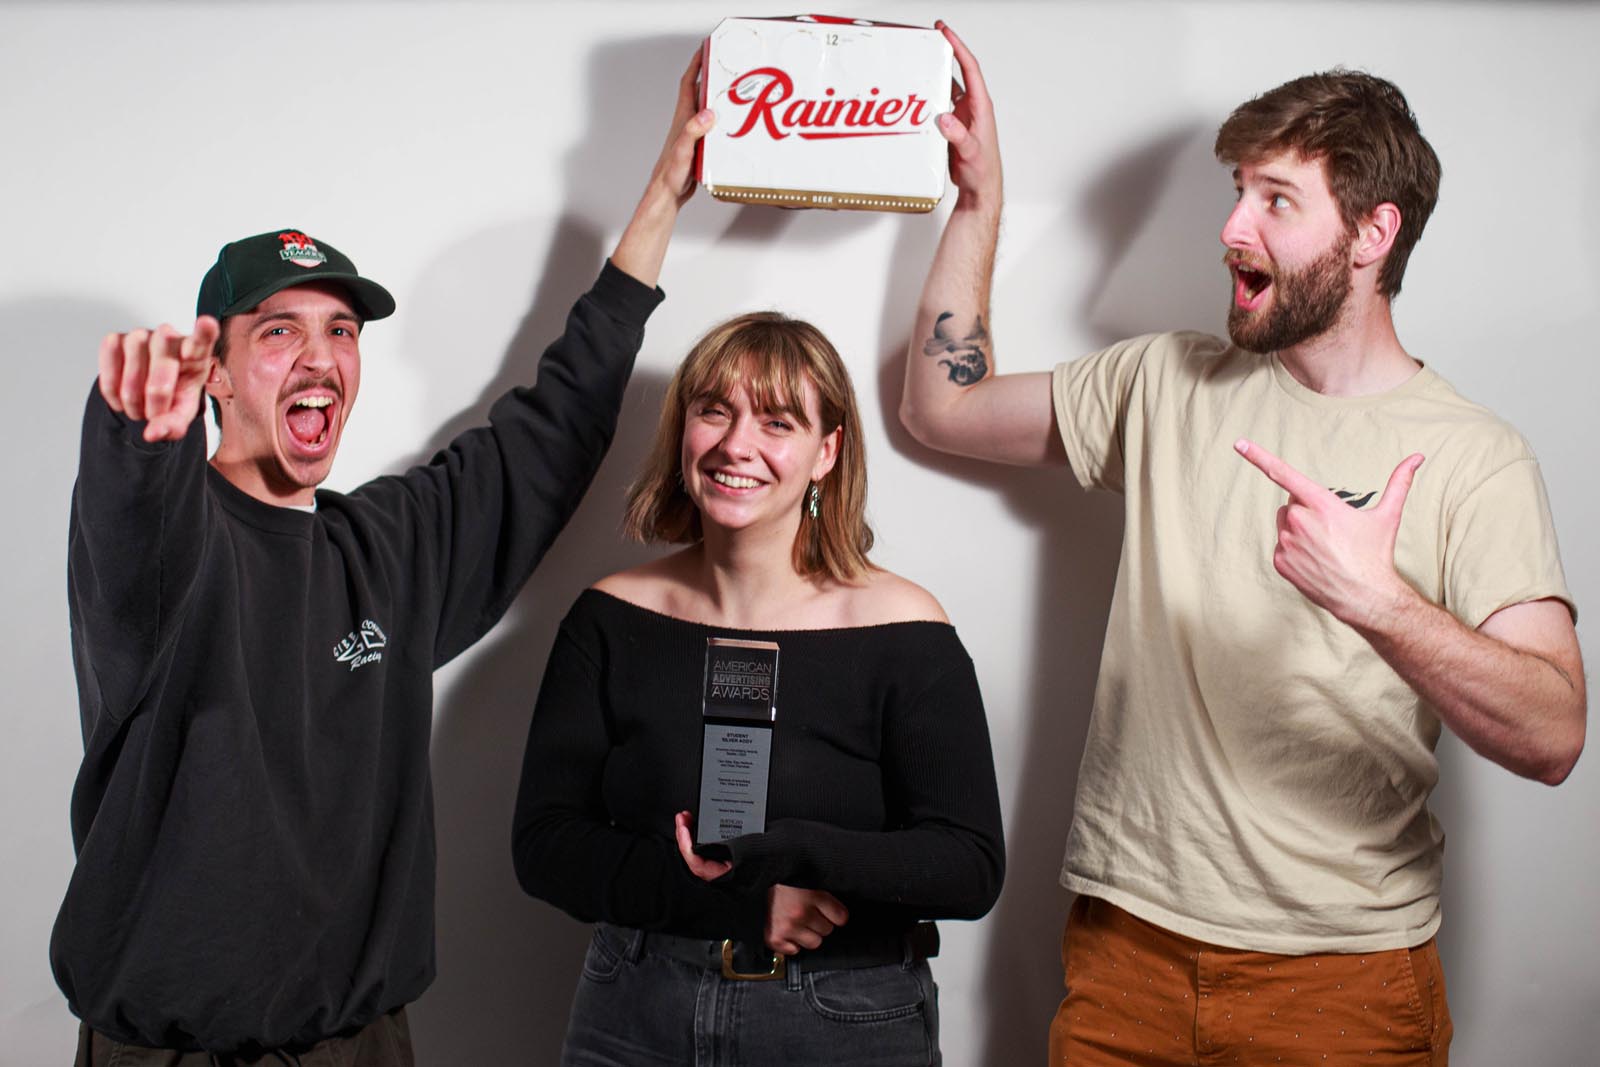 two excited students hold a box of Rainier beer over a third student who holds a trophy